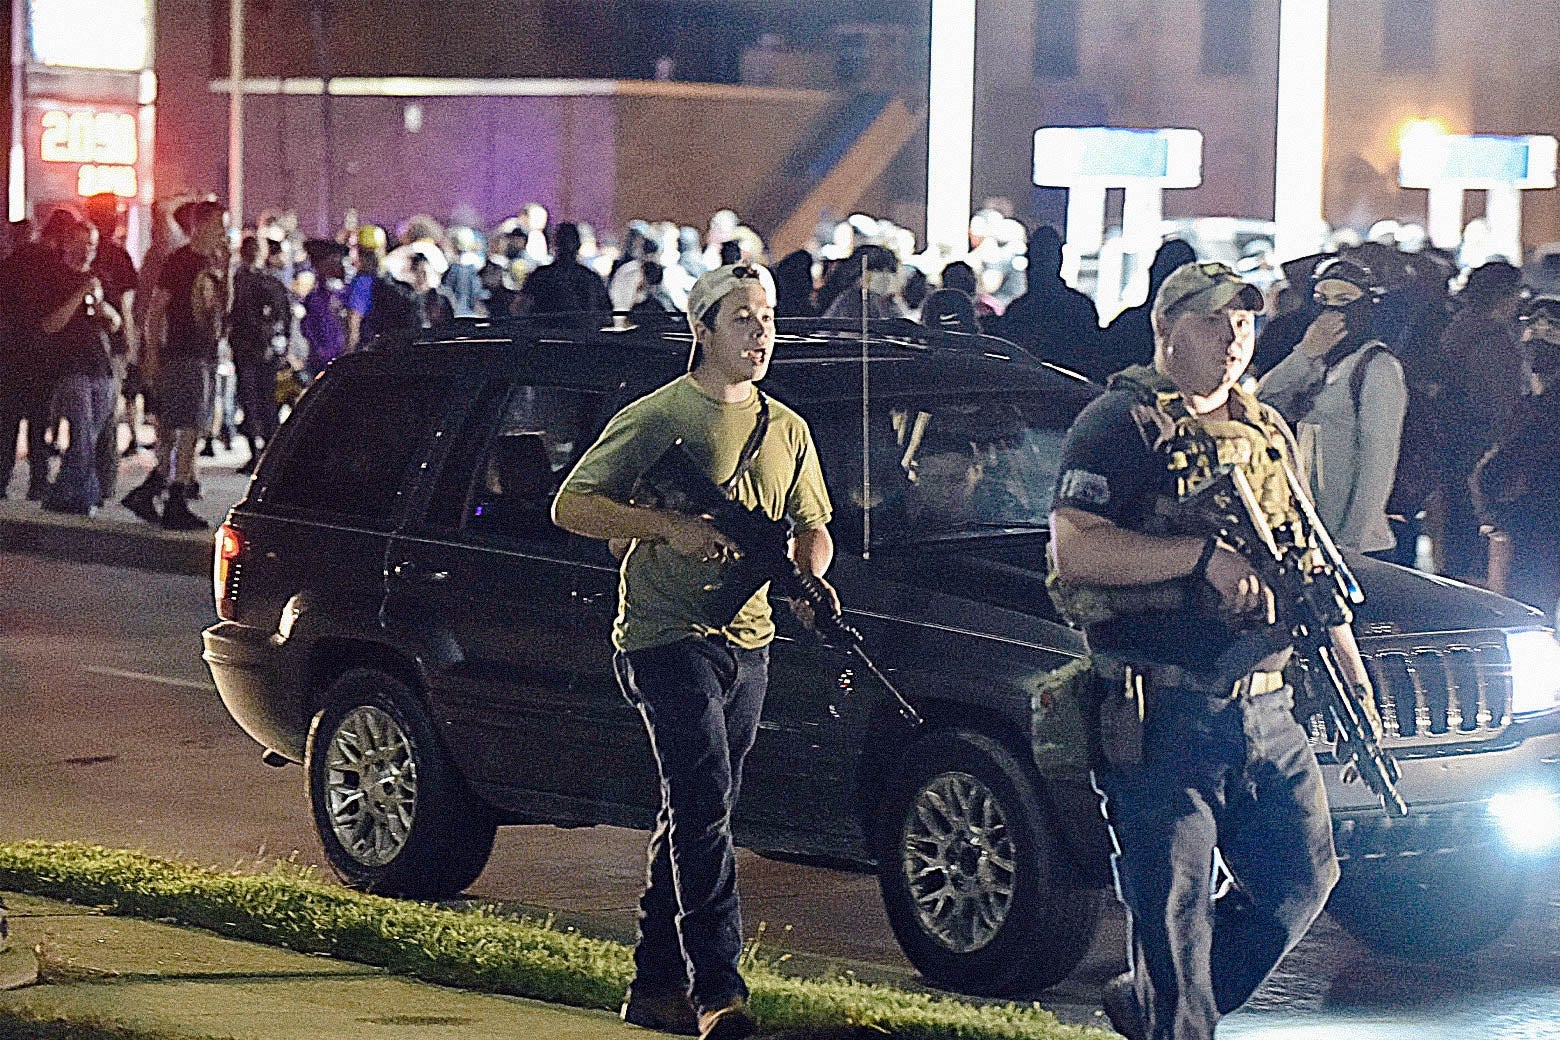 Rittenhouse in a T-shirt holding an AR-style rifle walks with Balch in a bulletproof vest also holding an AR-style rifle at night. Behind them are a black SUV and a large crowd of people.